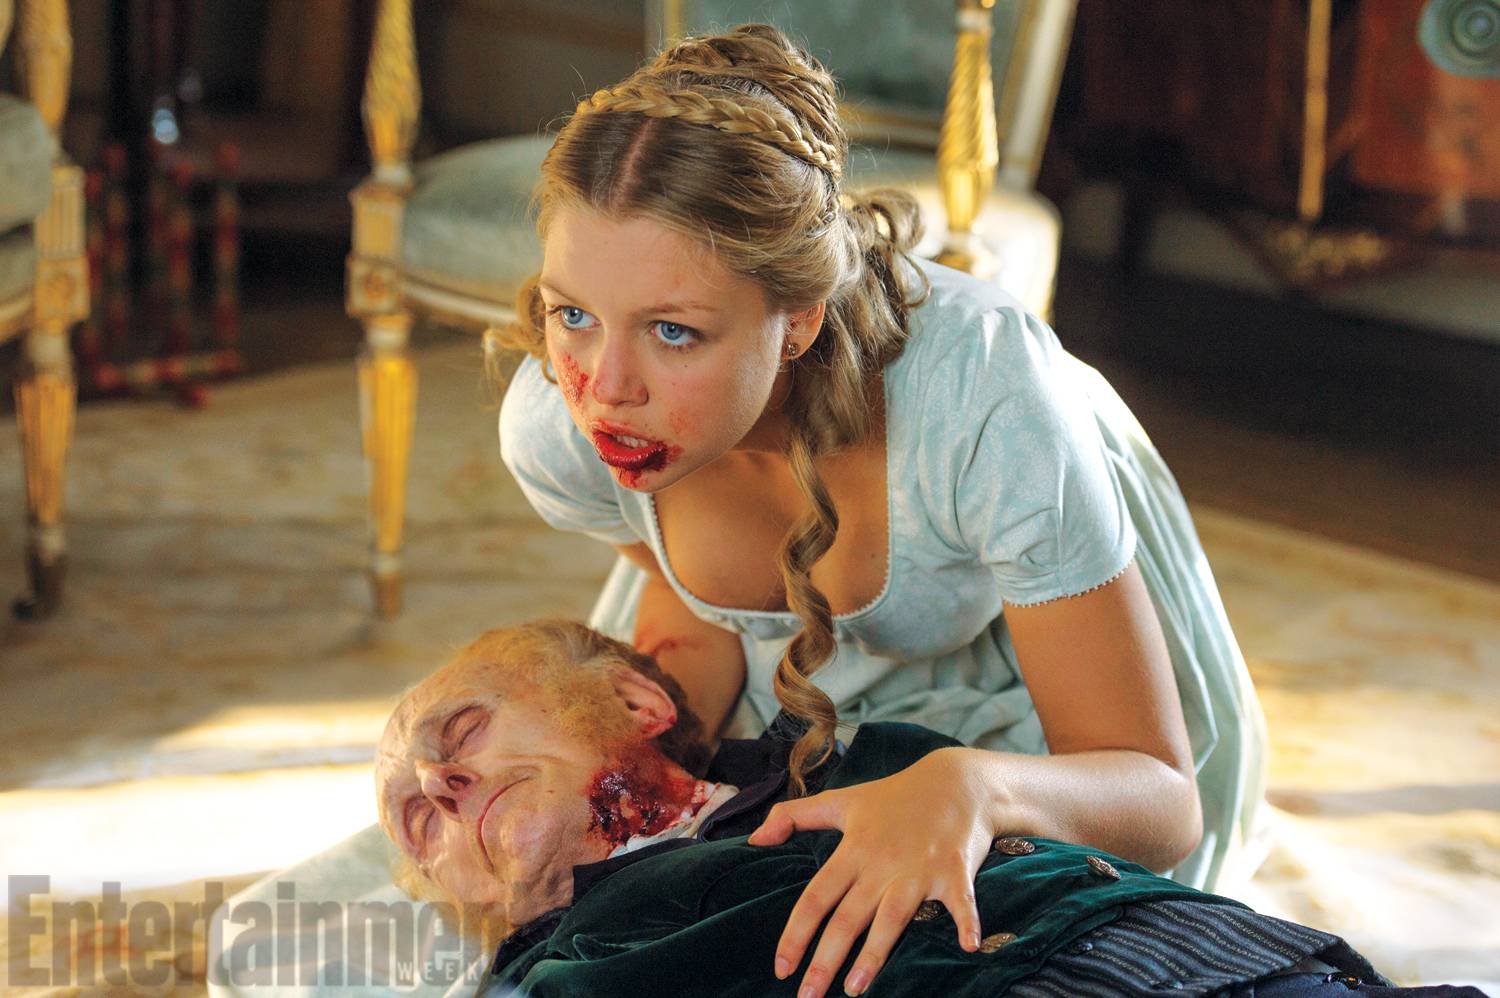 1017-1371-1372-ppz-pride-and-prejudice-and-zombies-03a-142539